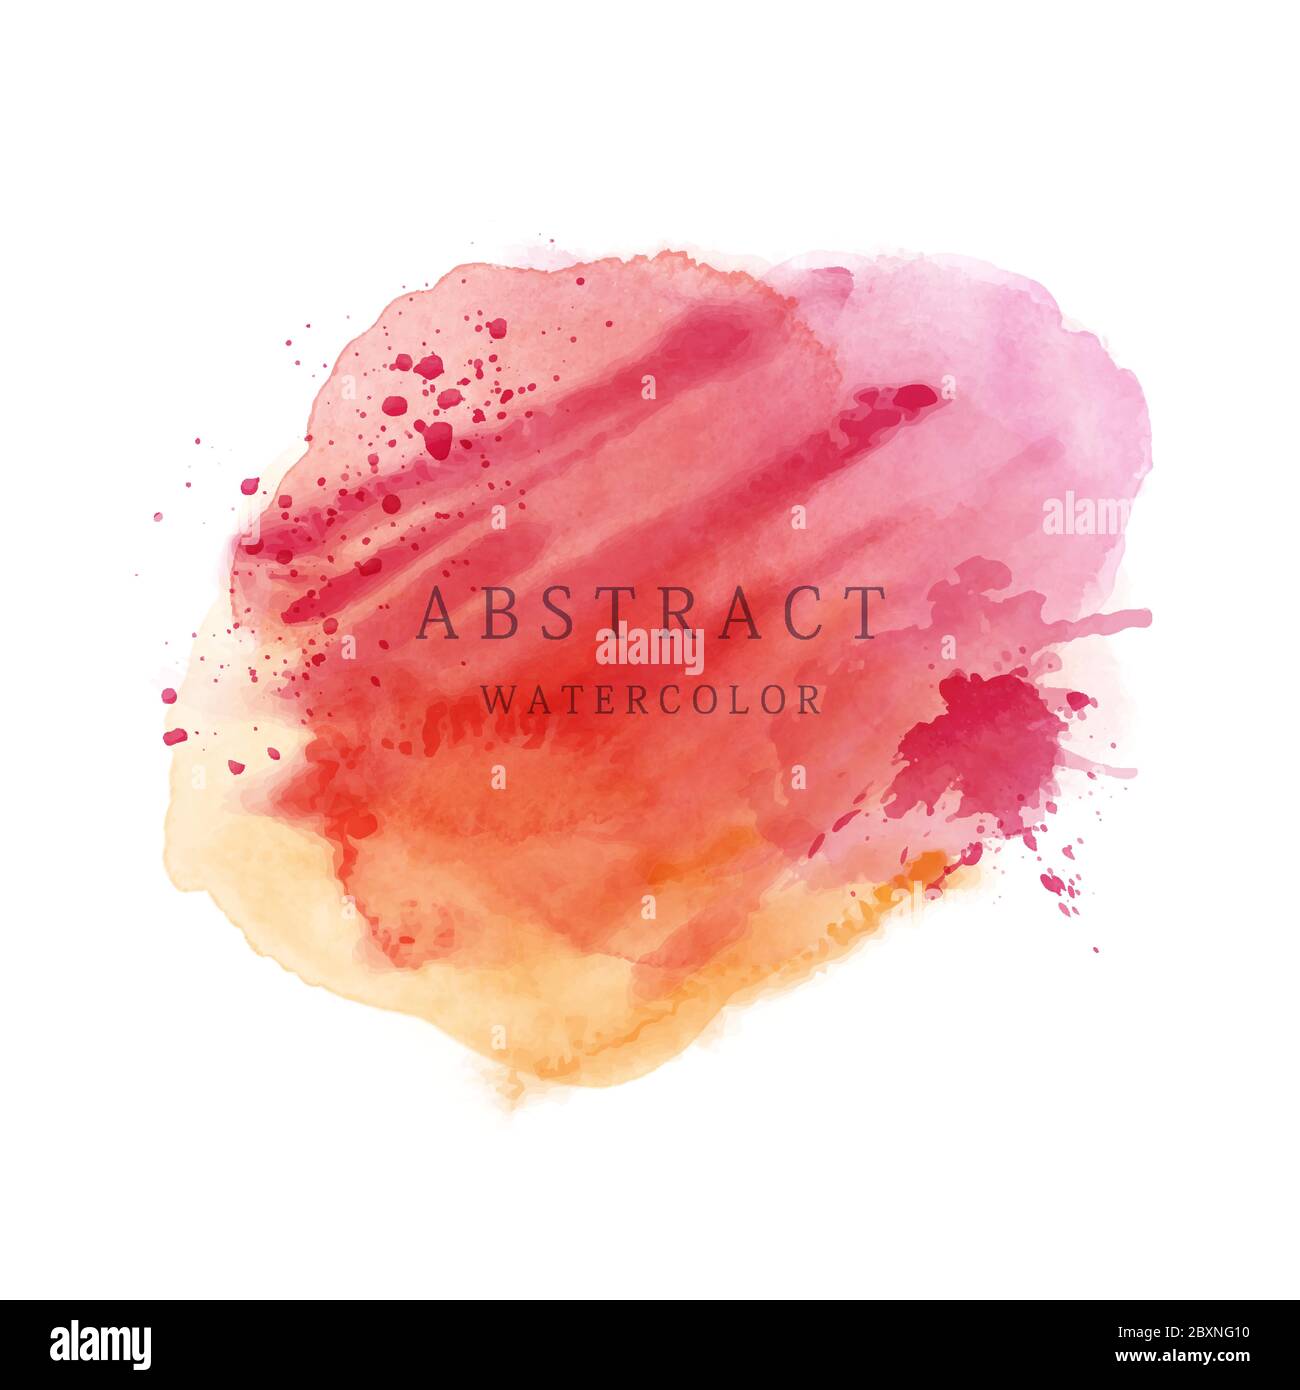 Abstract surface watercolor grunge background. Stain artistic vector used as being an element in the decorative design of header, brochure, poster, ca Stock Vector